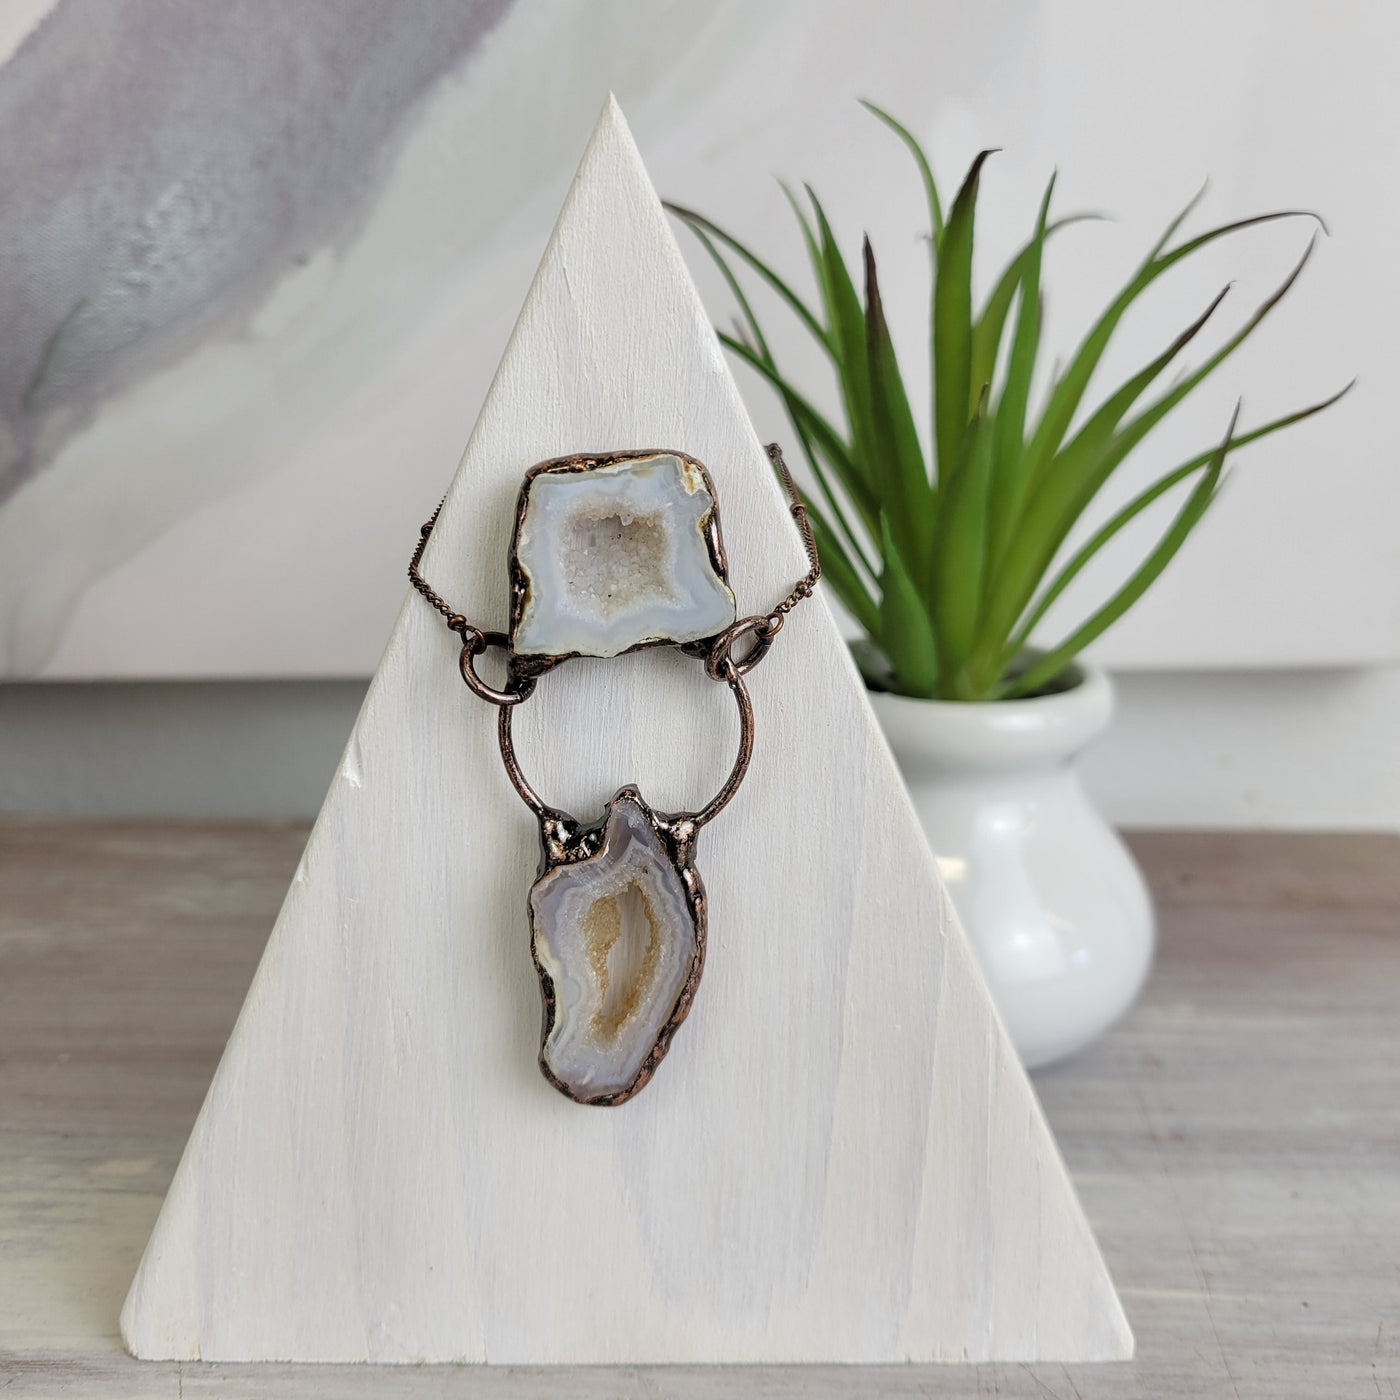 Agate Geode Pendant Necklace Double Stone with Antique Bronze Chain